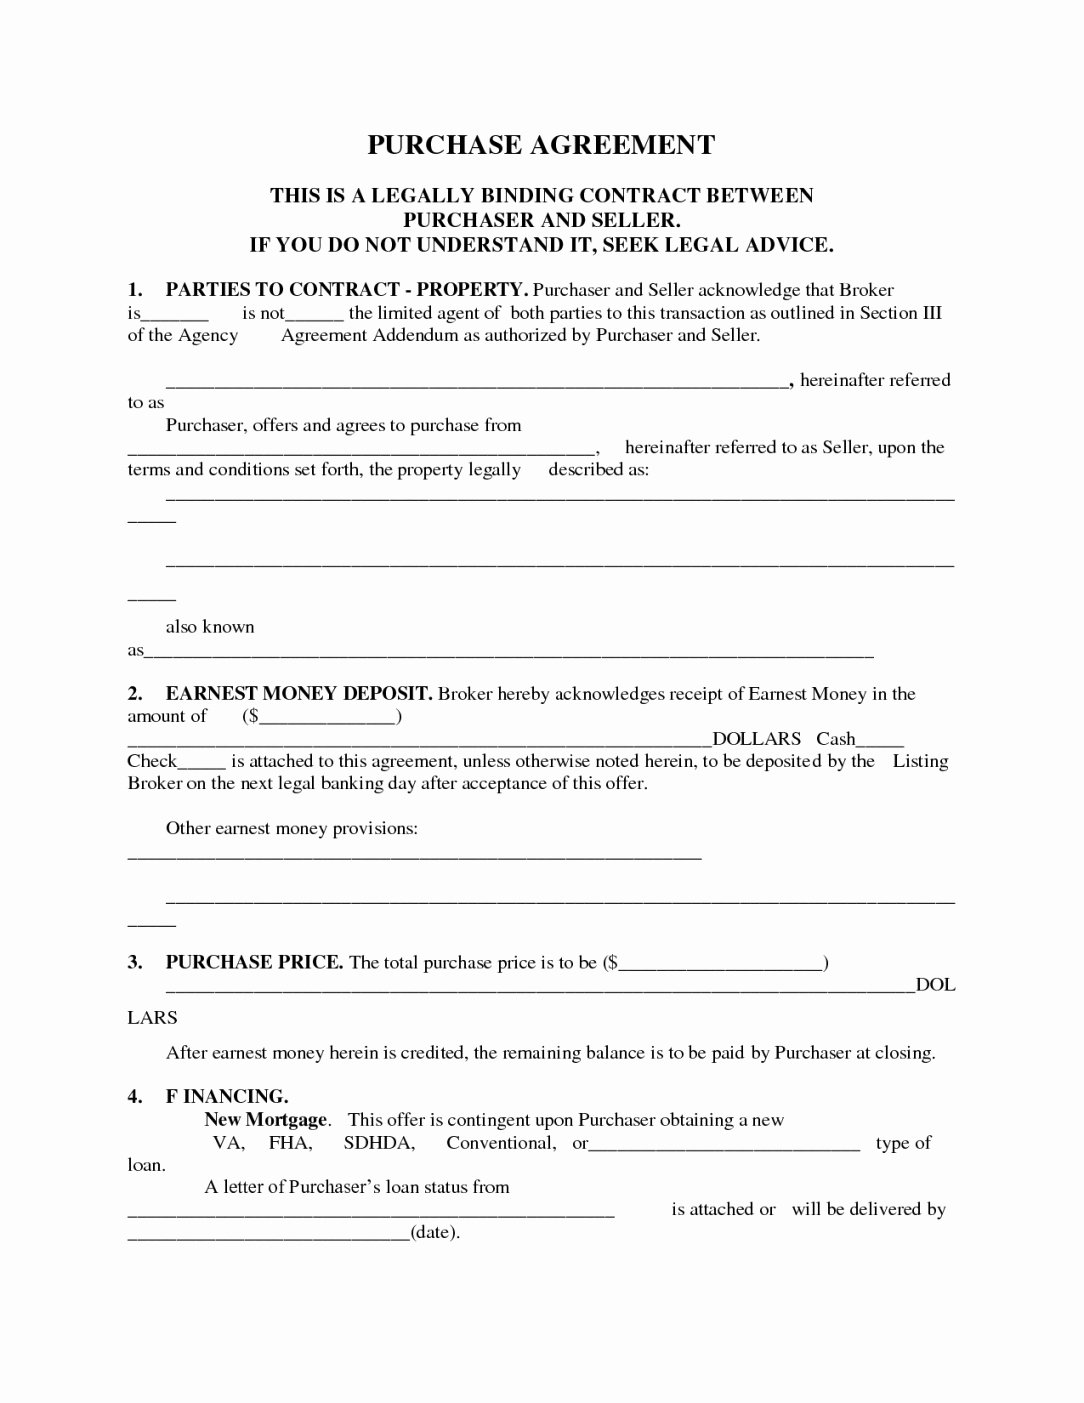 Simple Purchase Agreement Template Unique Simple Real Estate Purchase Agreement